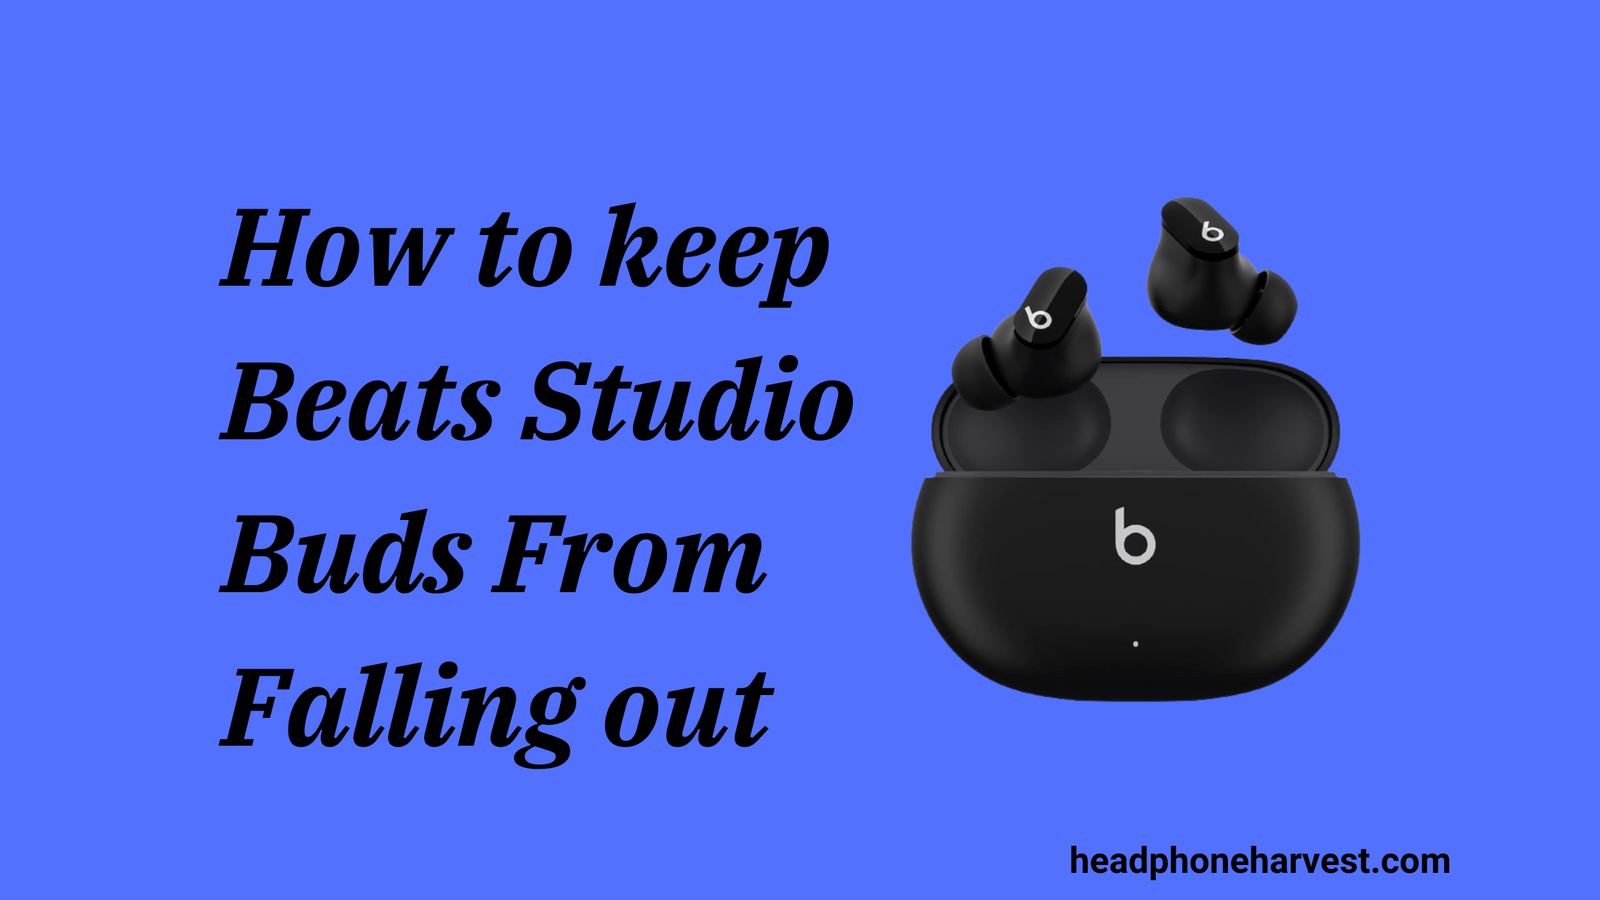 How to keep Beats Studio Buds From Falling out